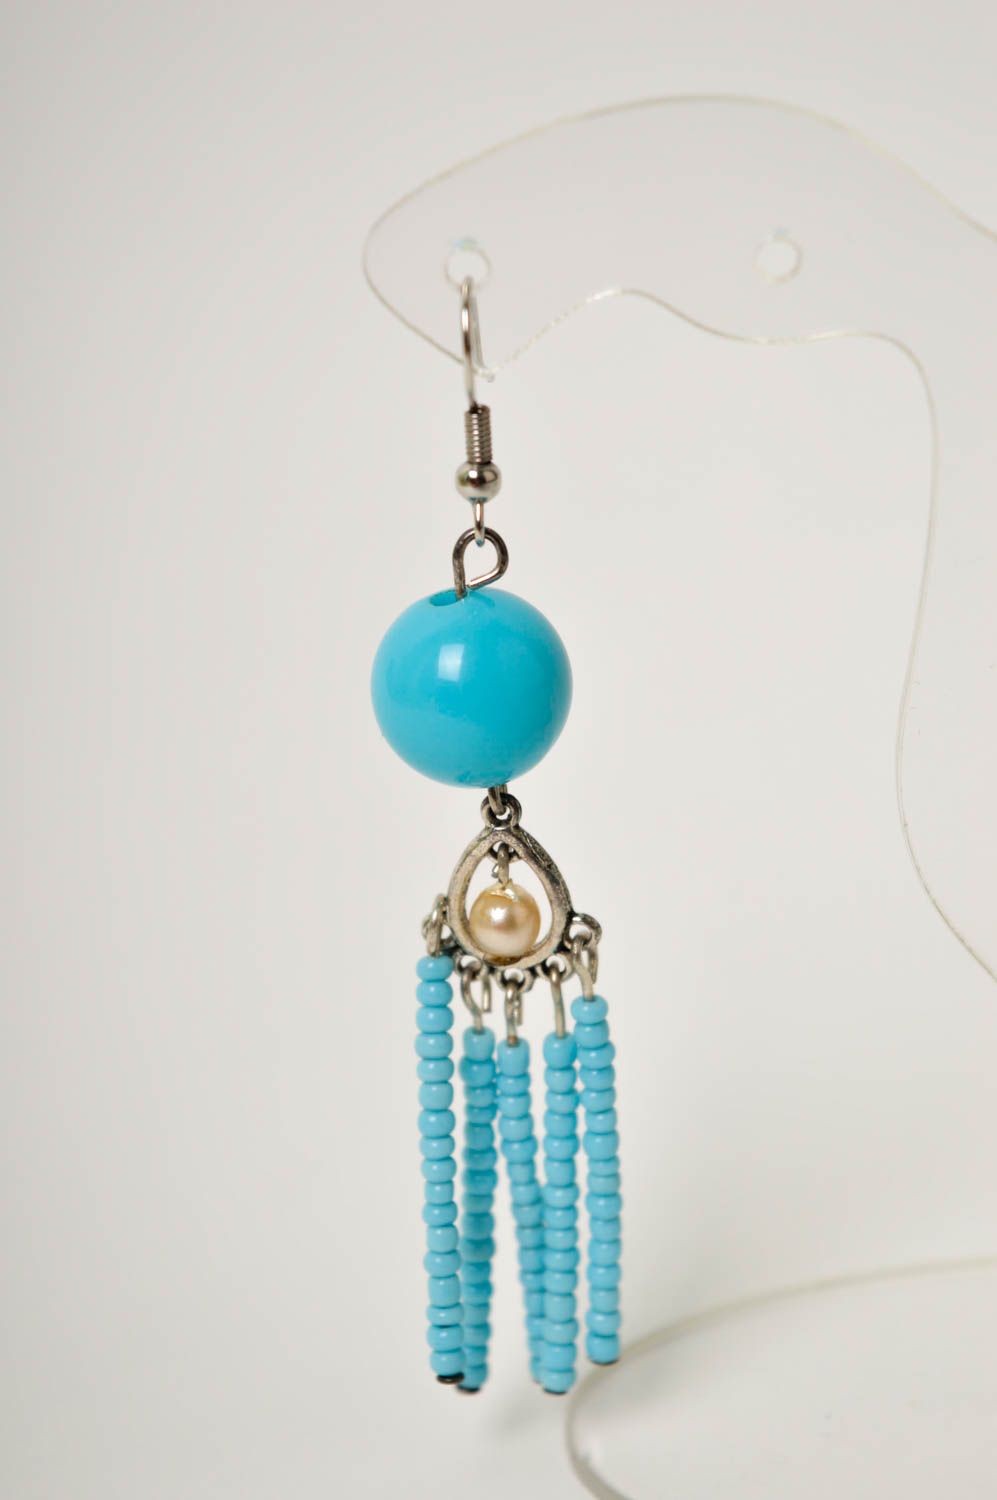 Handmade earrings long earrings with charms designer jewelry gift ideas photo 3